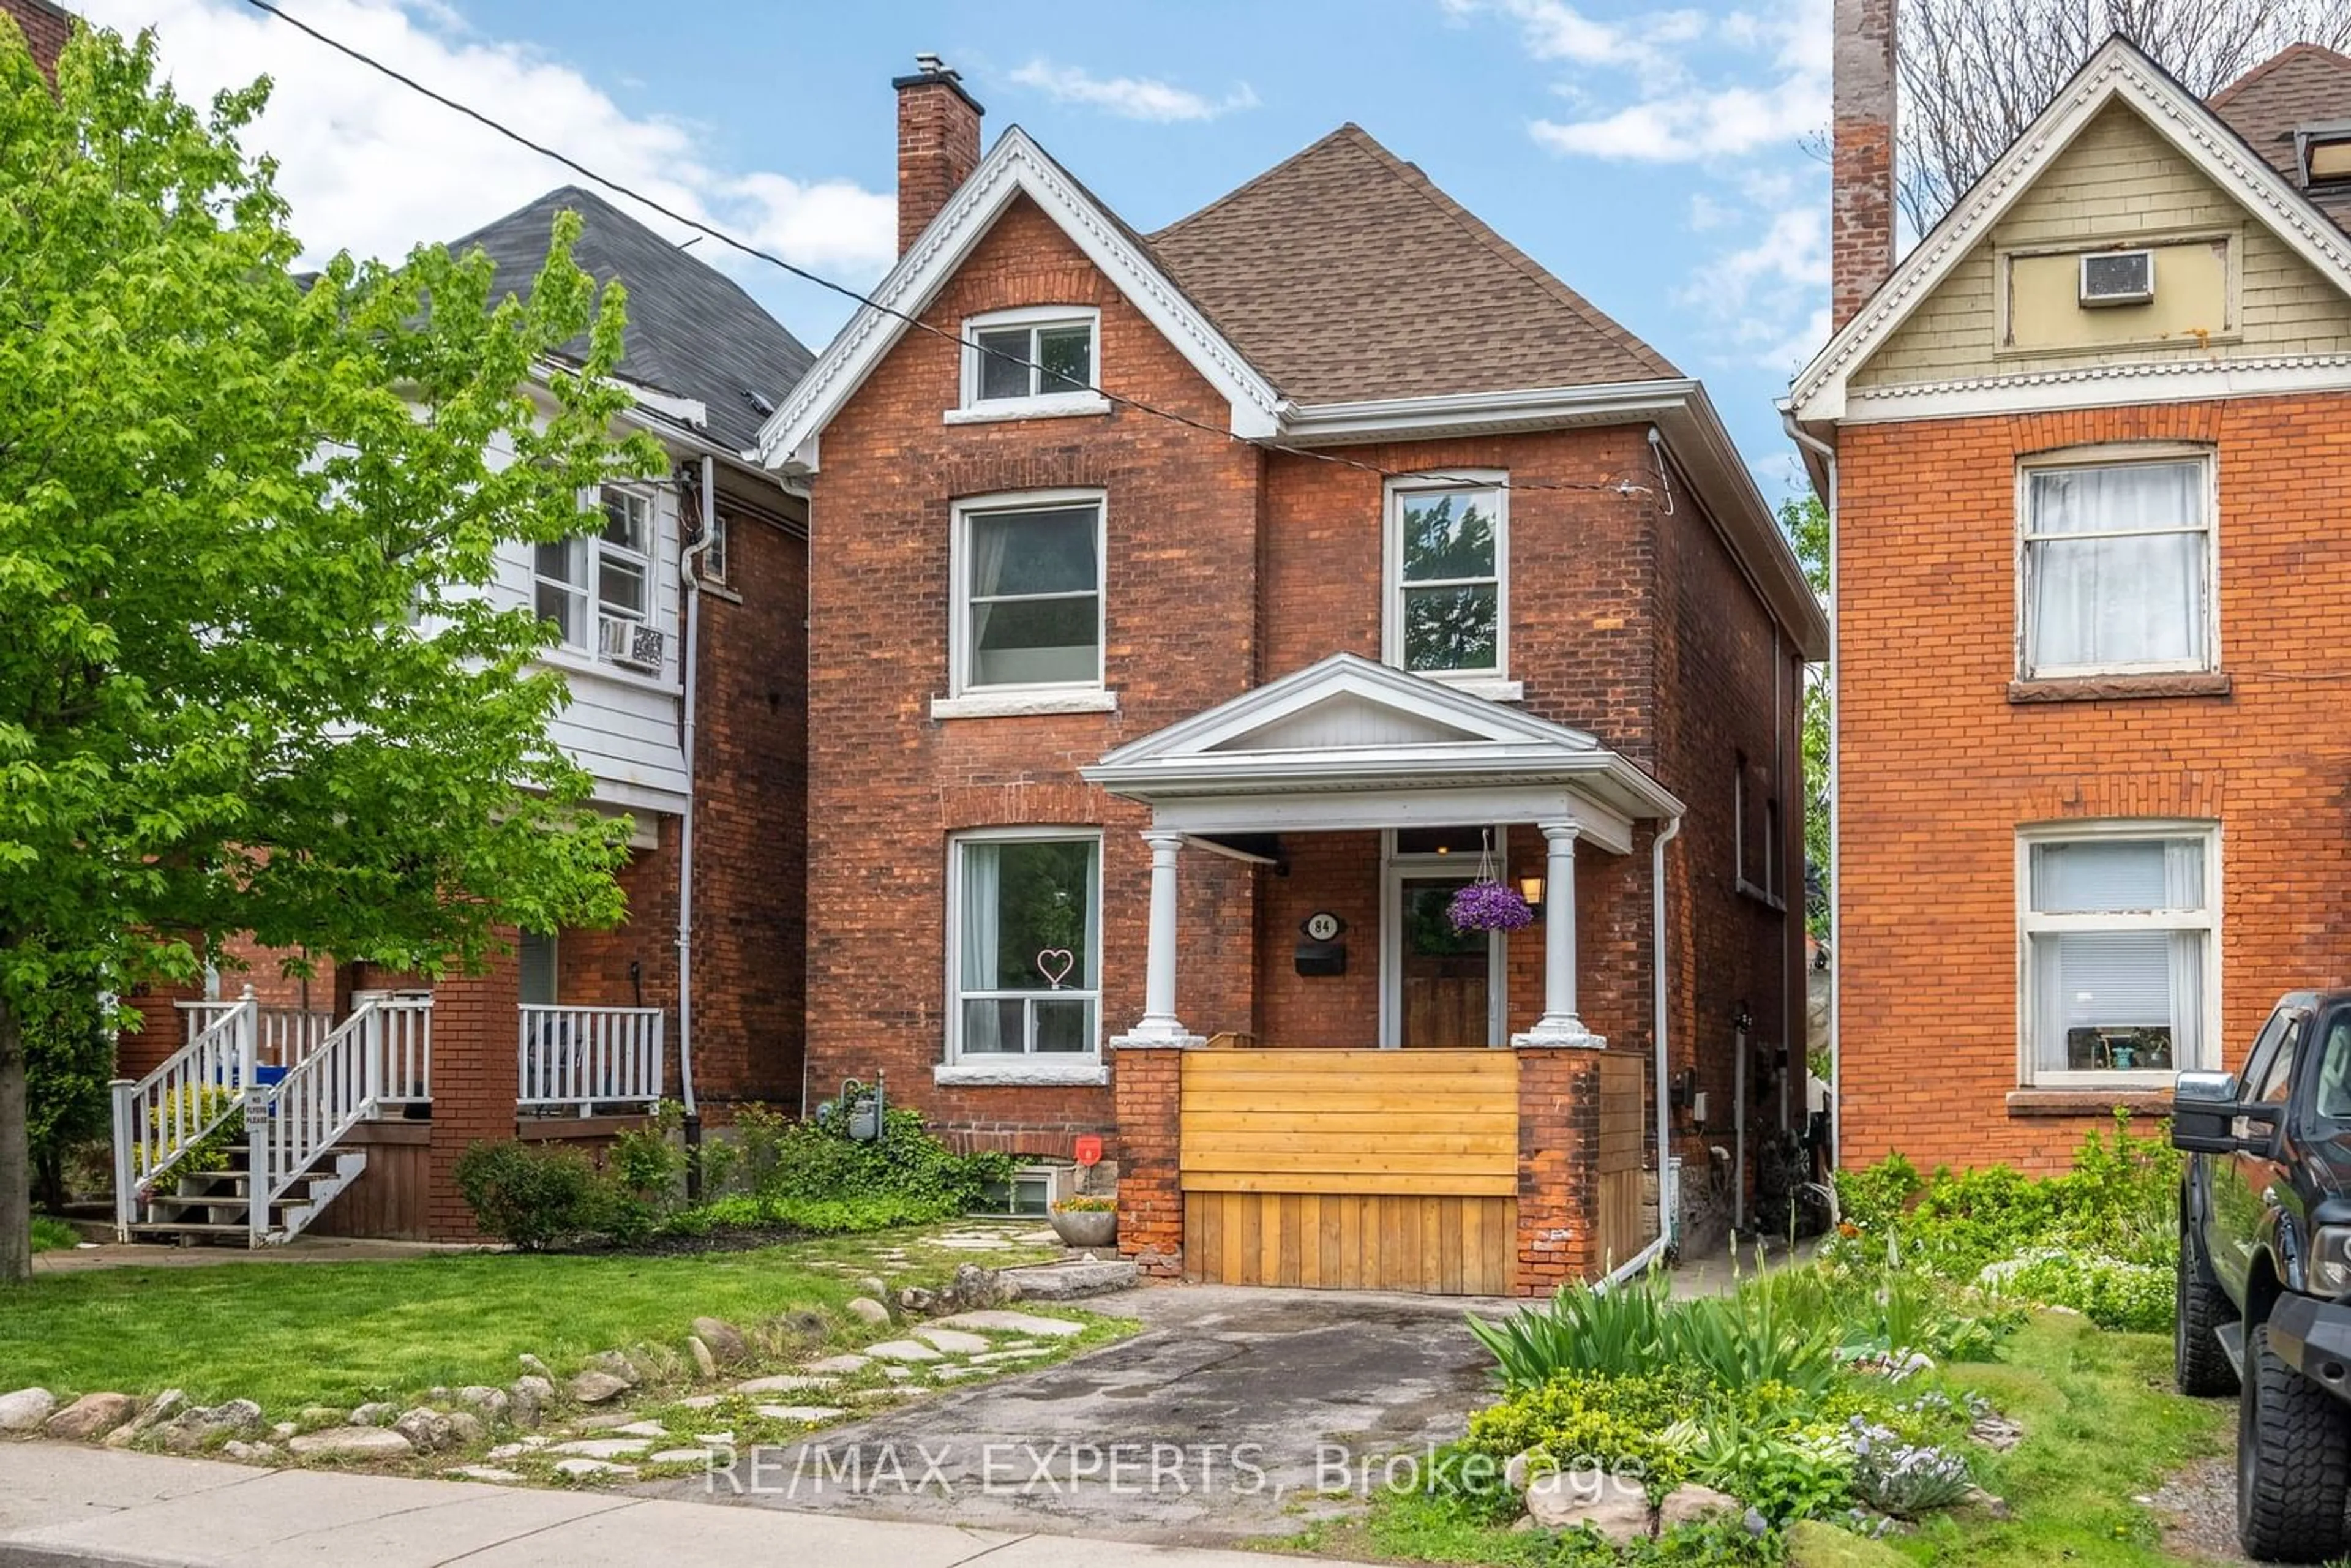 Home with brick exterior material for 84 Sanford Ave, Hamilton Ontario L8M 2G8